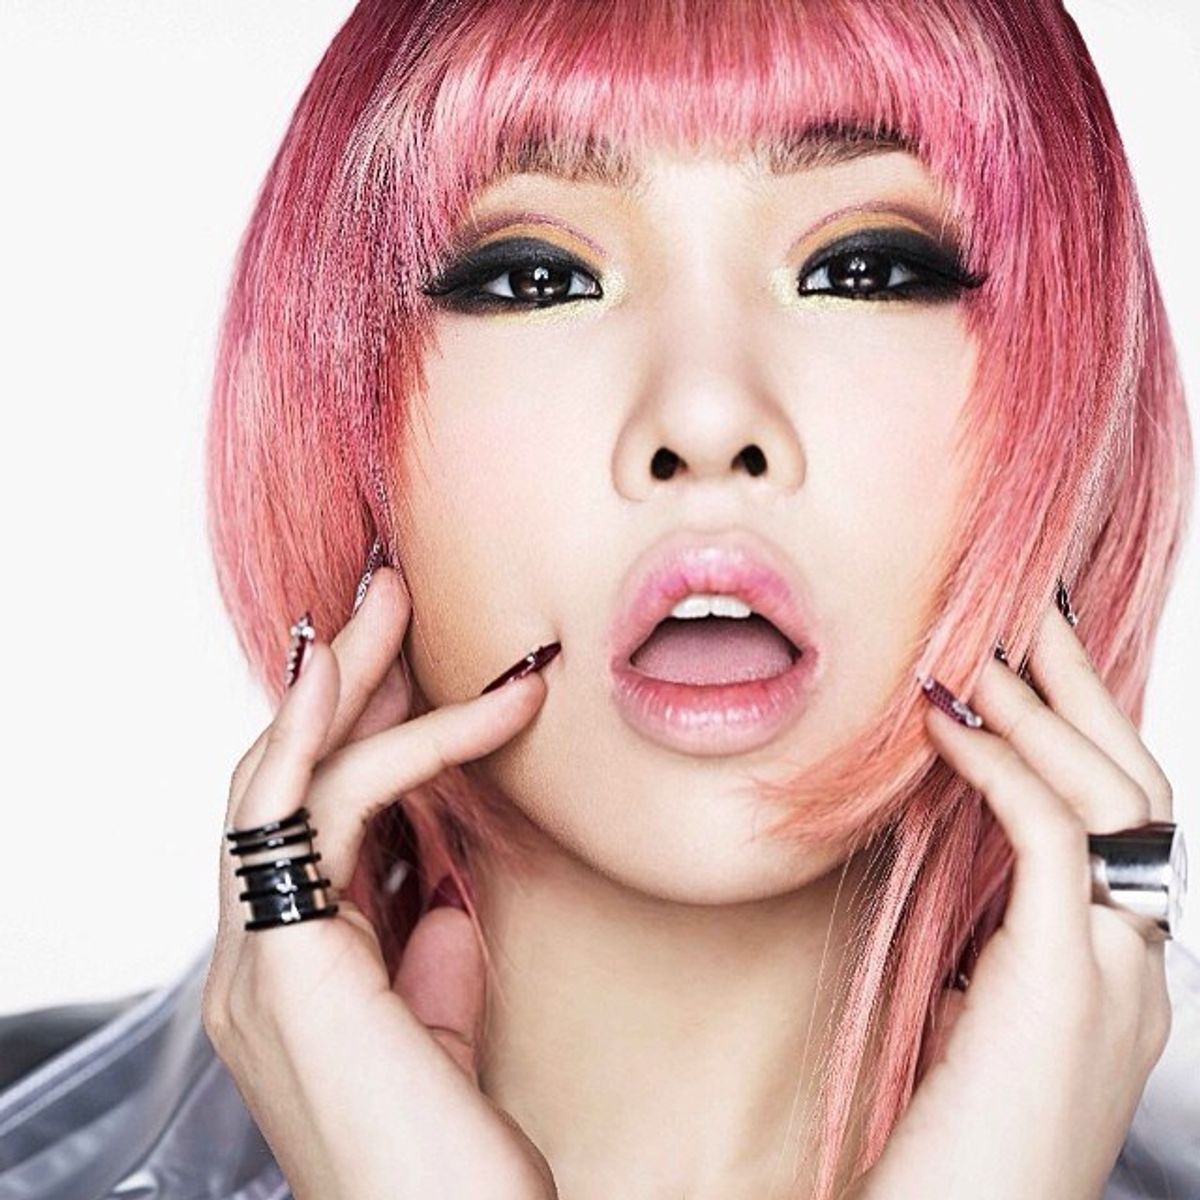 An Open Letter To Minzy